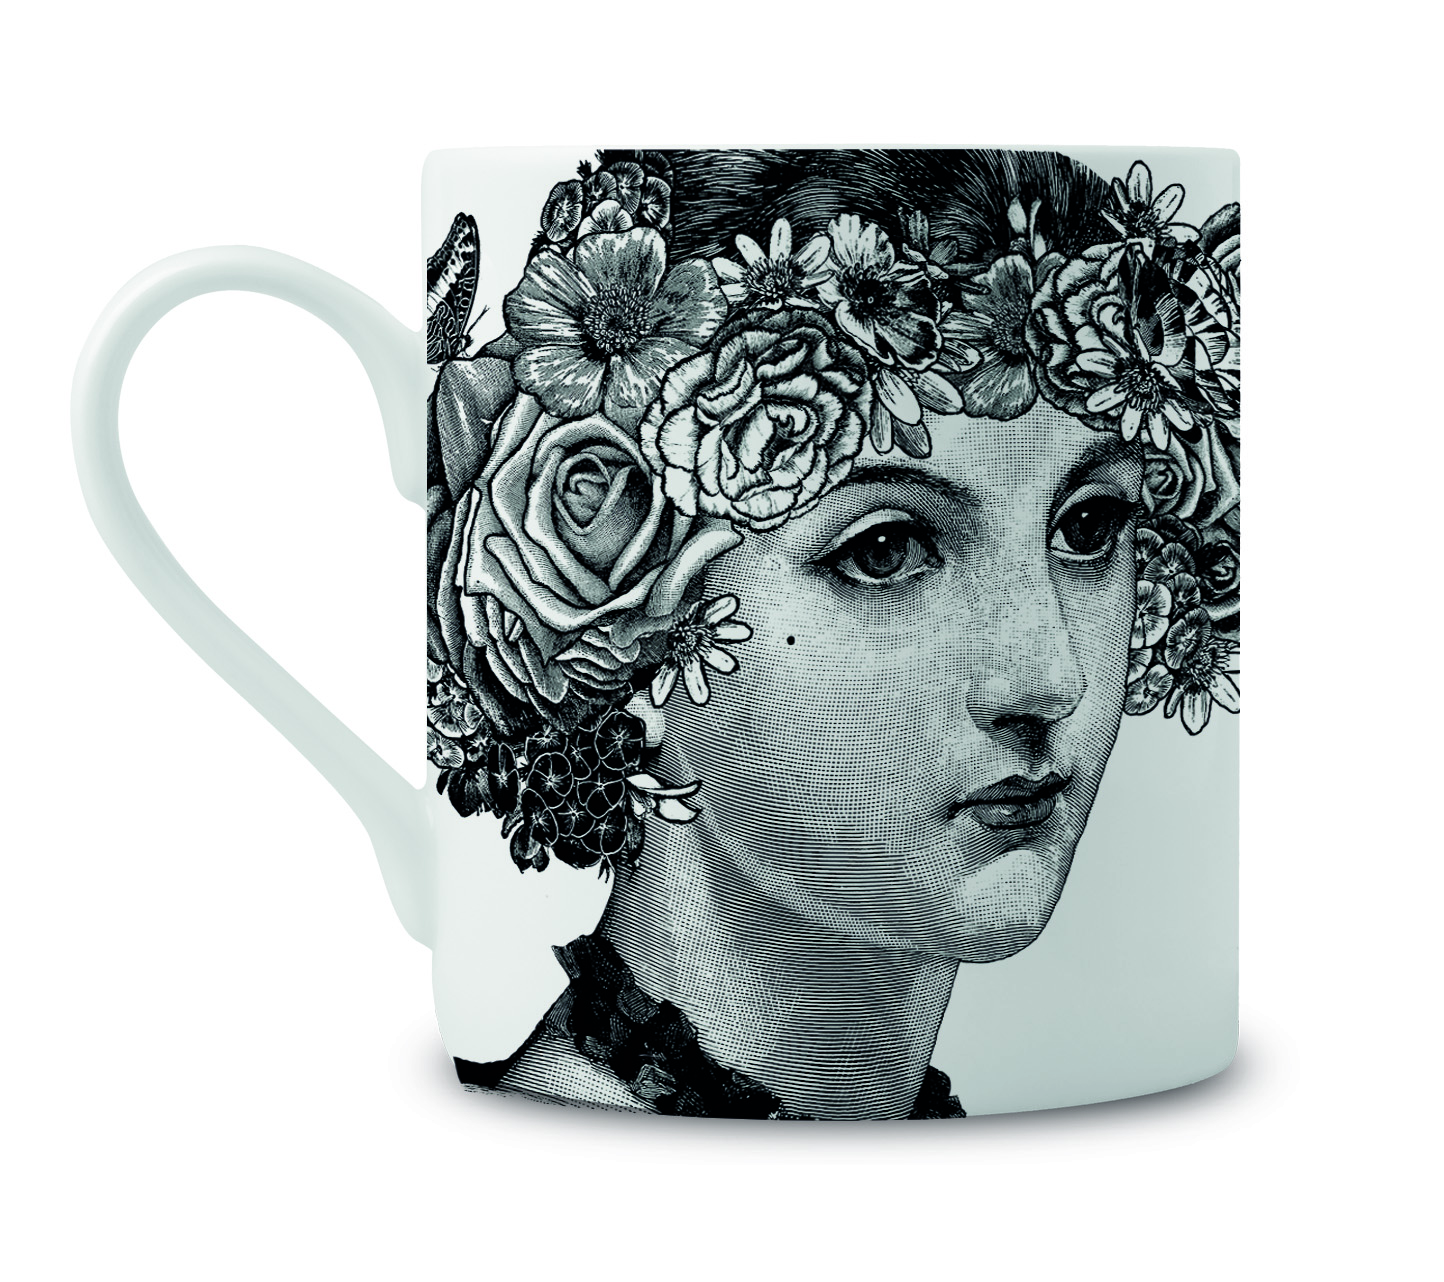   https://www.chaseandwonder.com/collections/fine-china-mugs/products/flower-lady-china-mug  